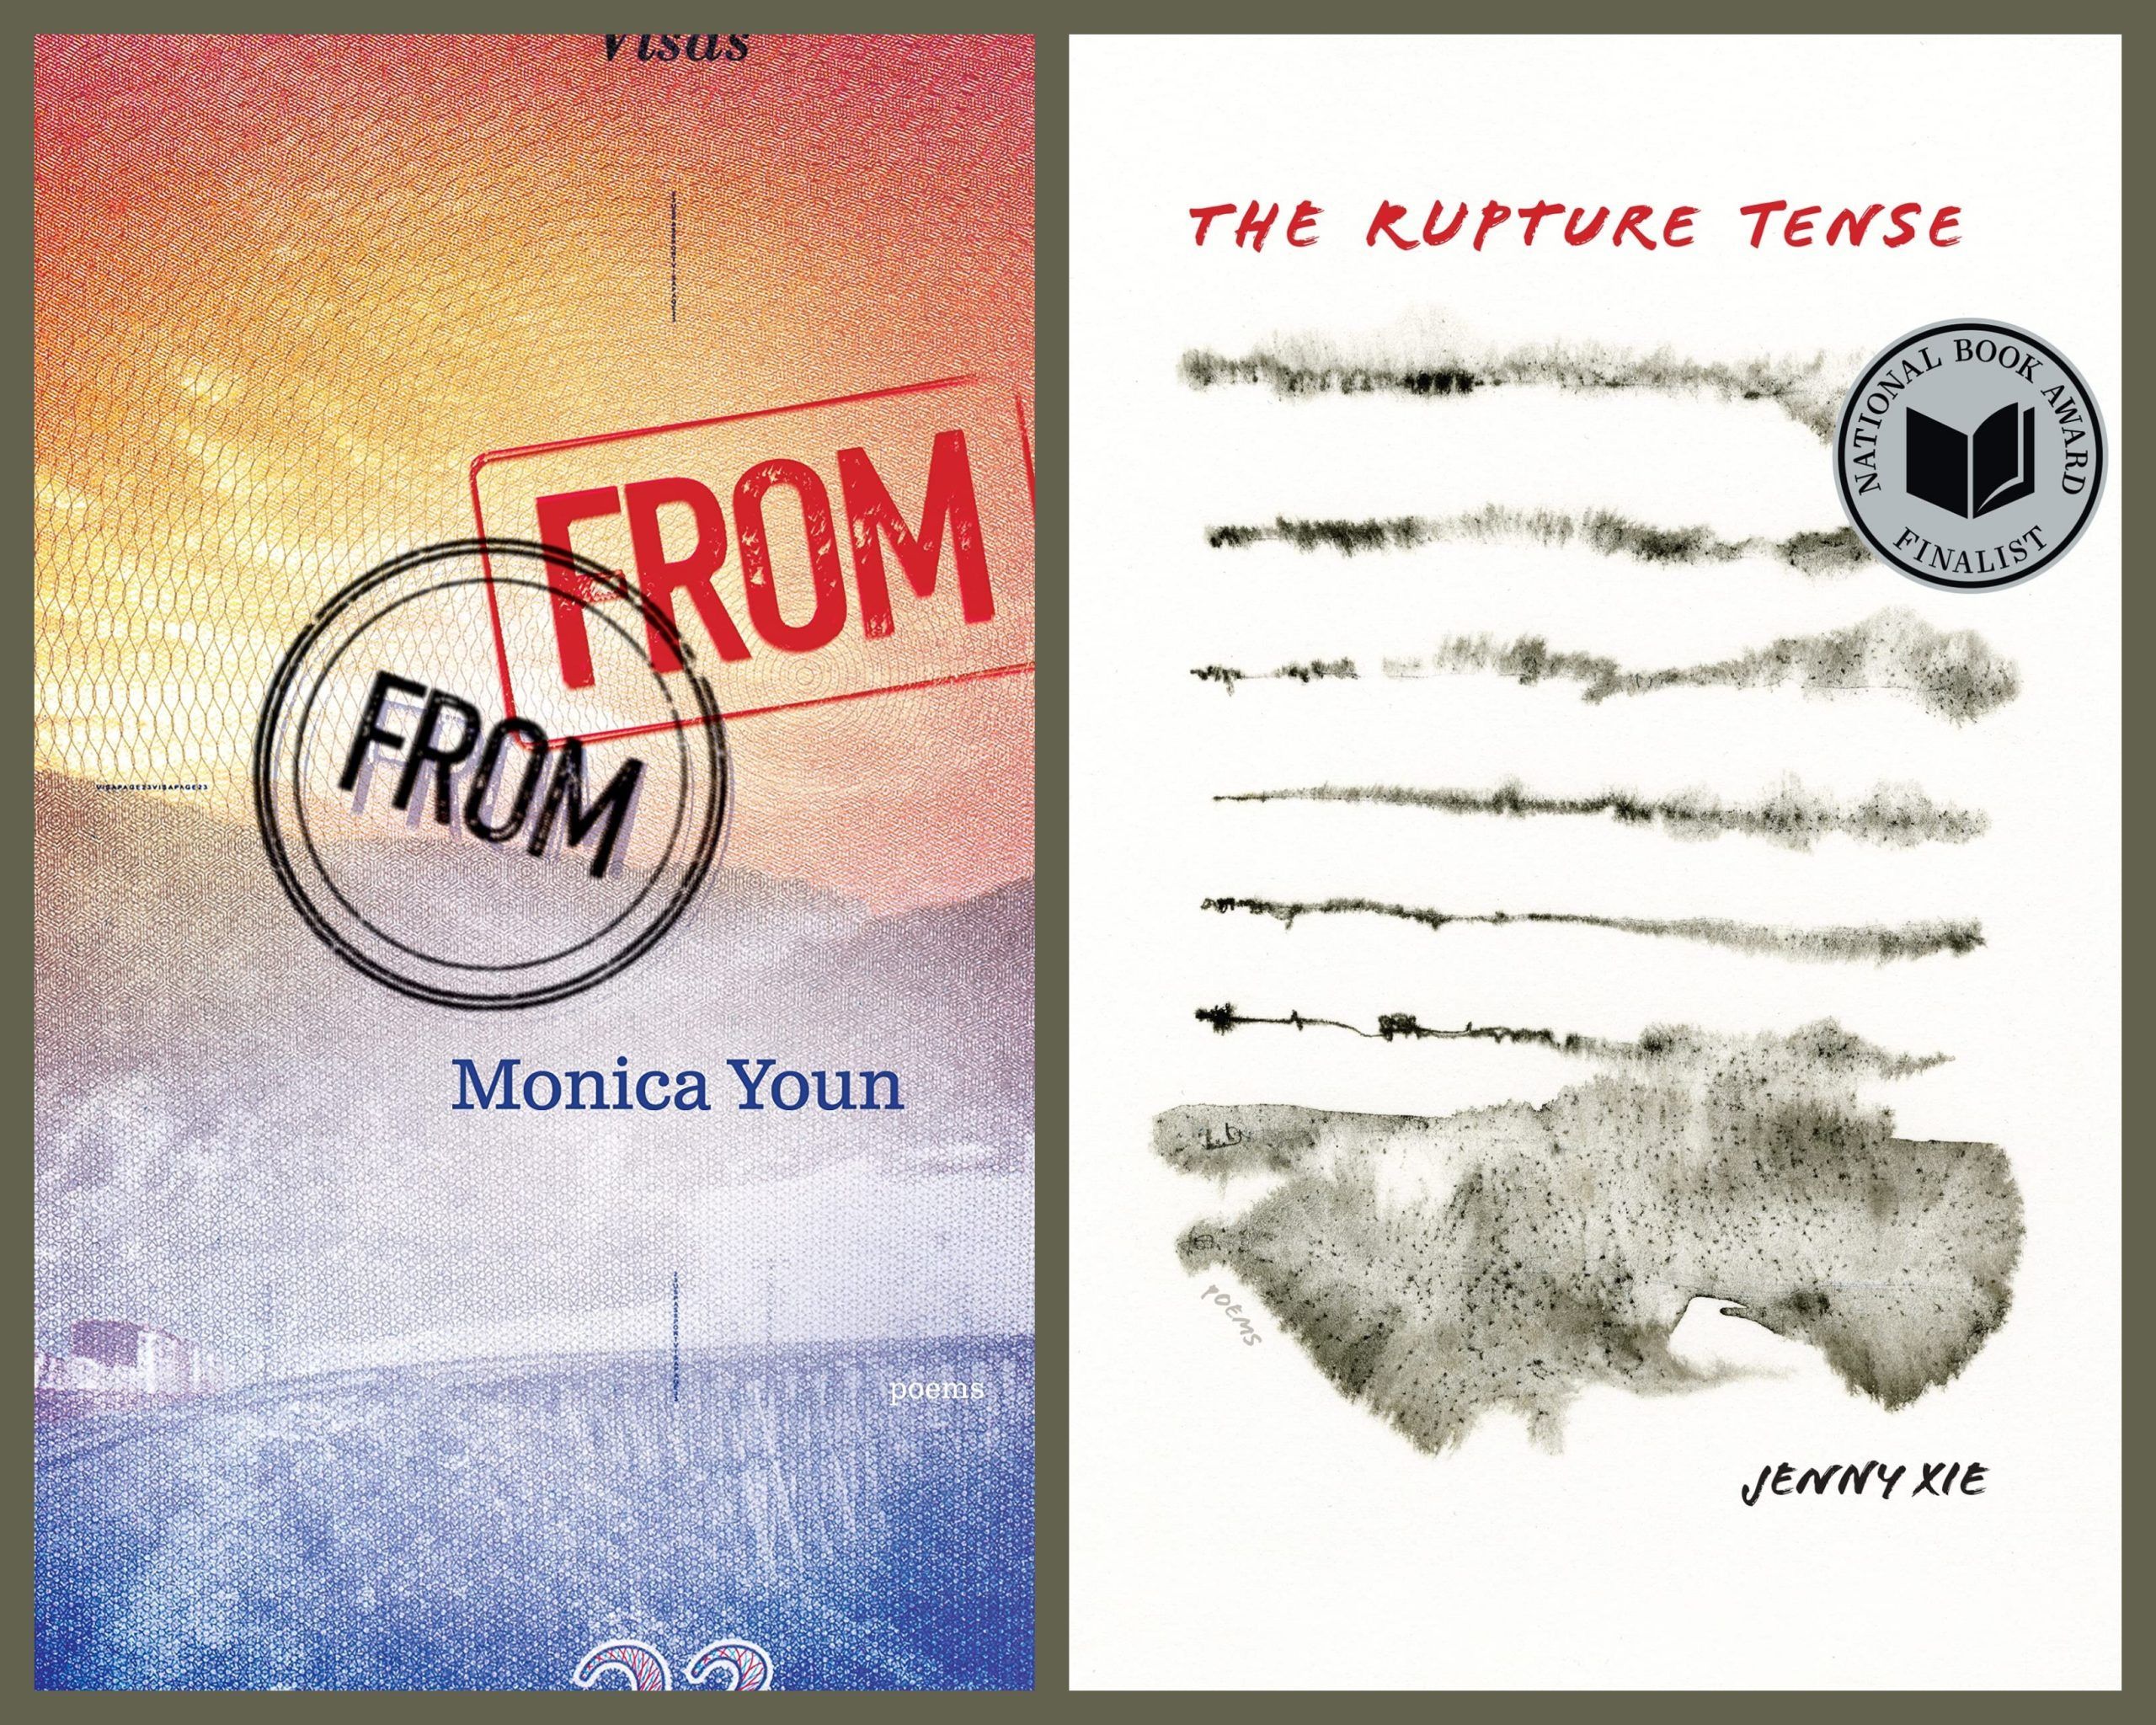 Two Roads: A Review-in-Dialogue of Jenny Xie’s “The Rupture Tense” and Monica Youn’s “From From”